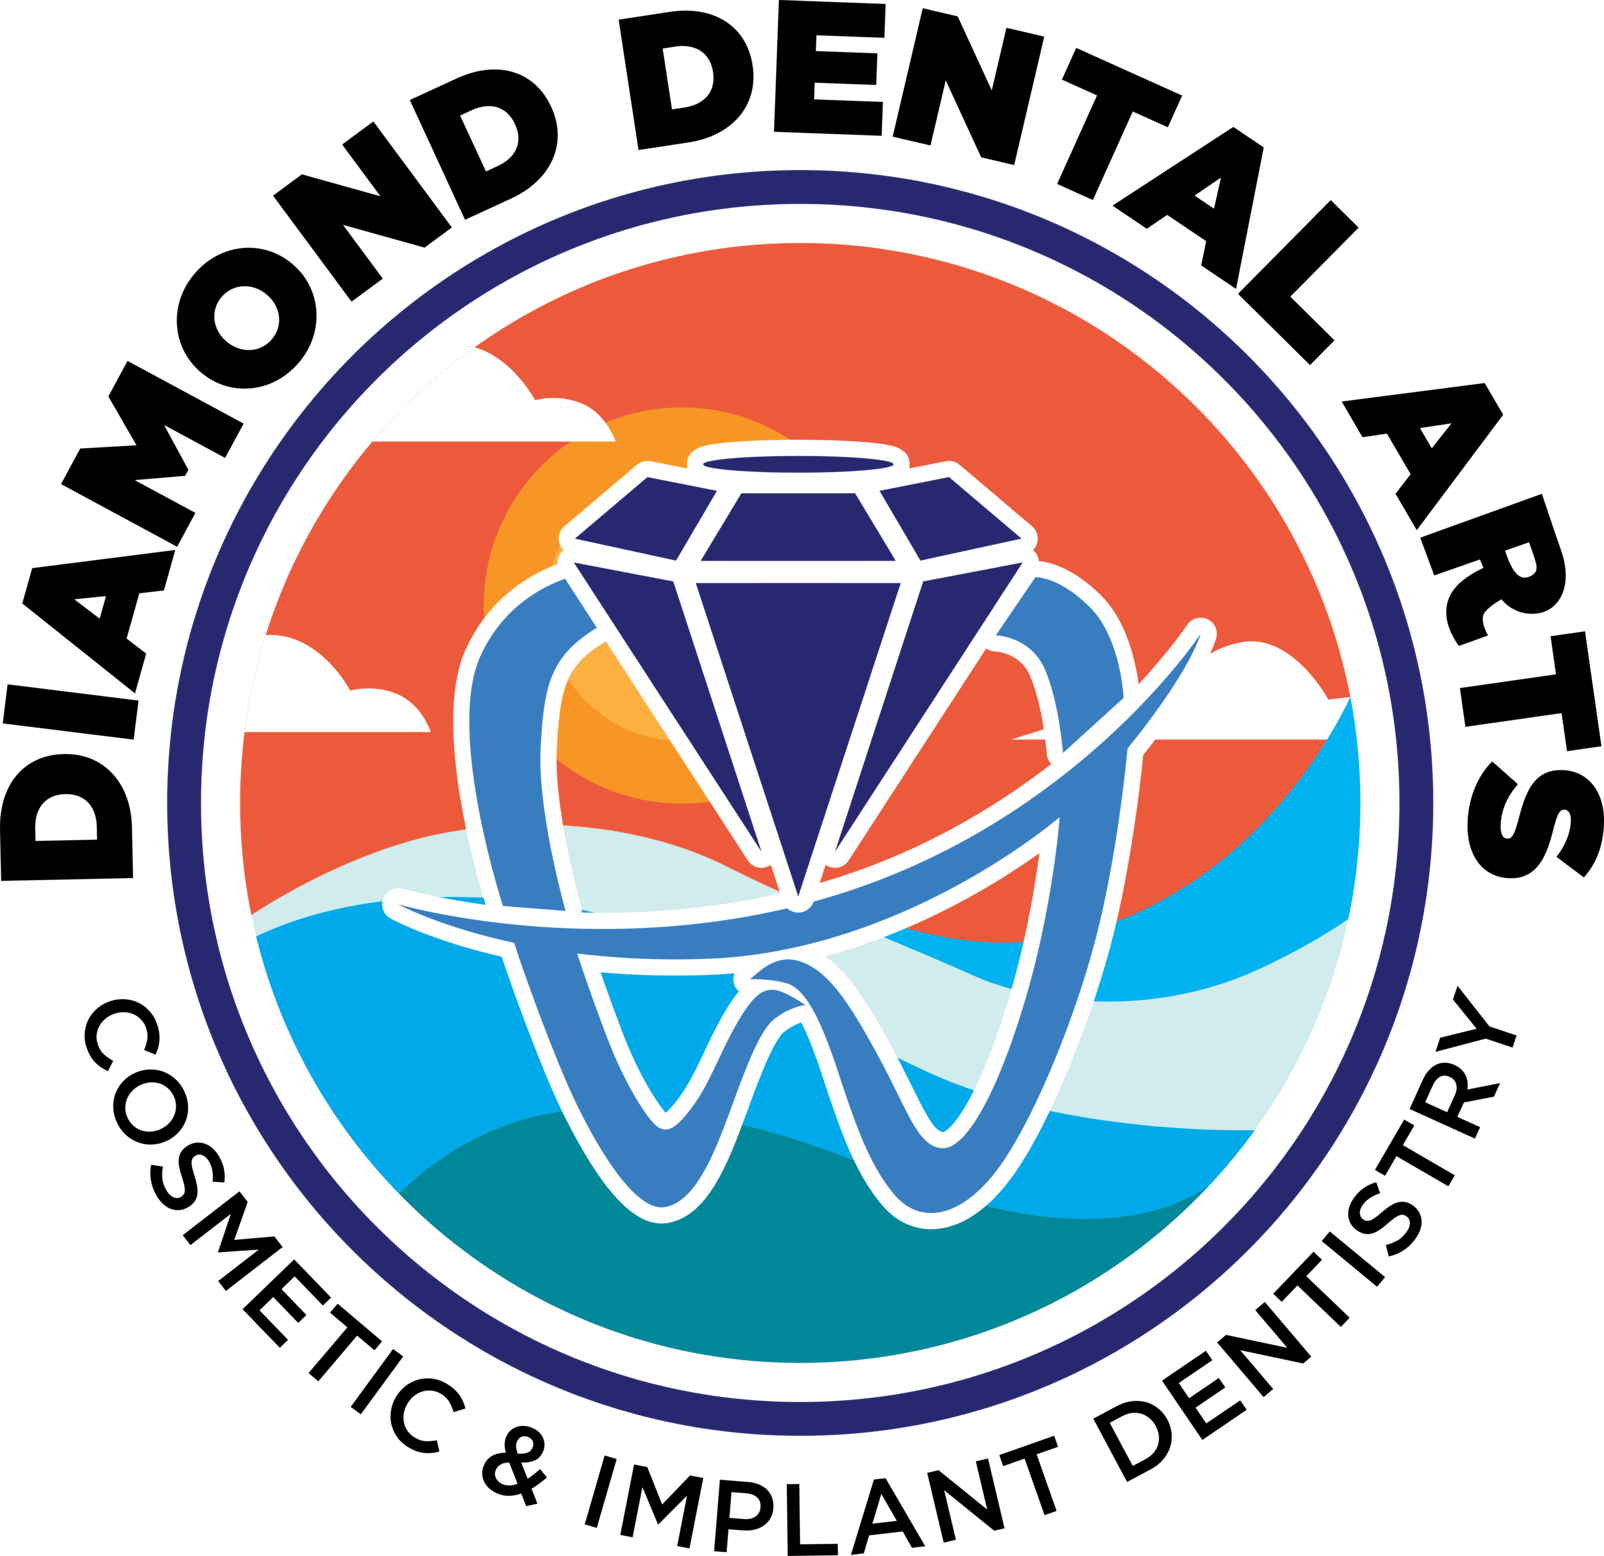 The logo for diamond dental arts cosmetic and implant dentistry